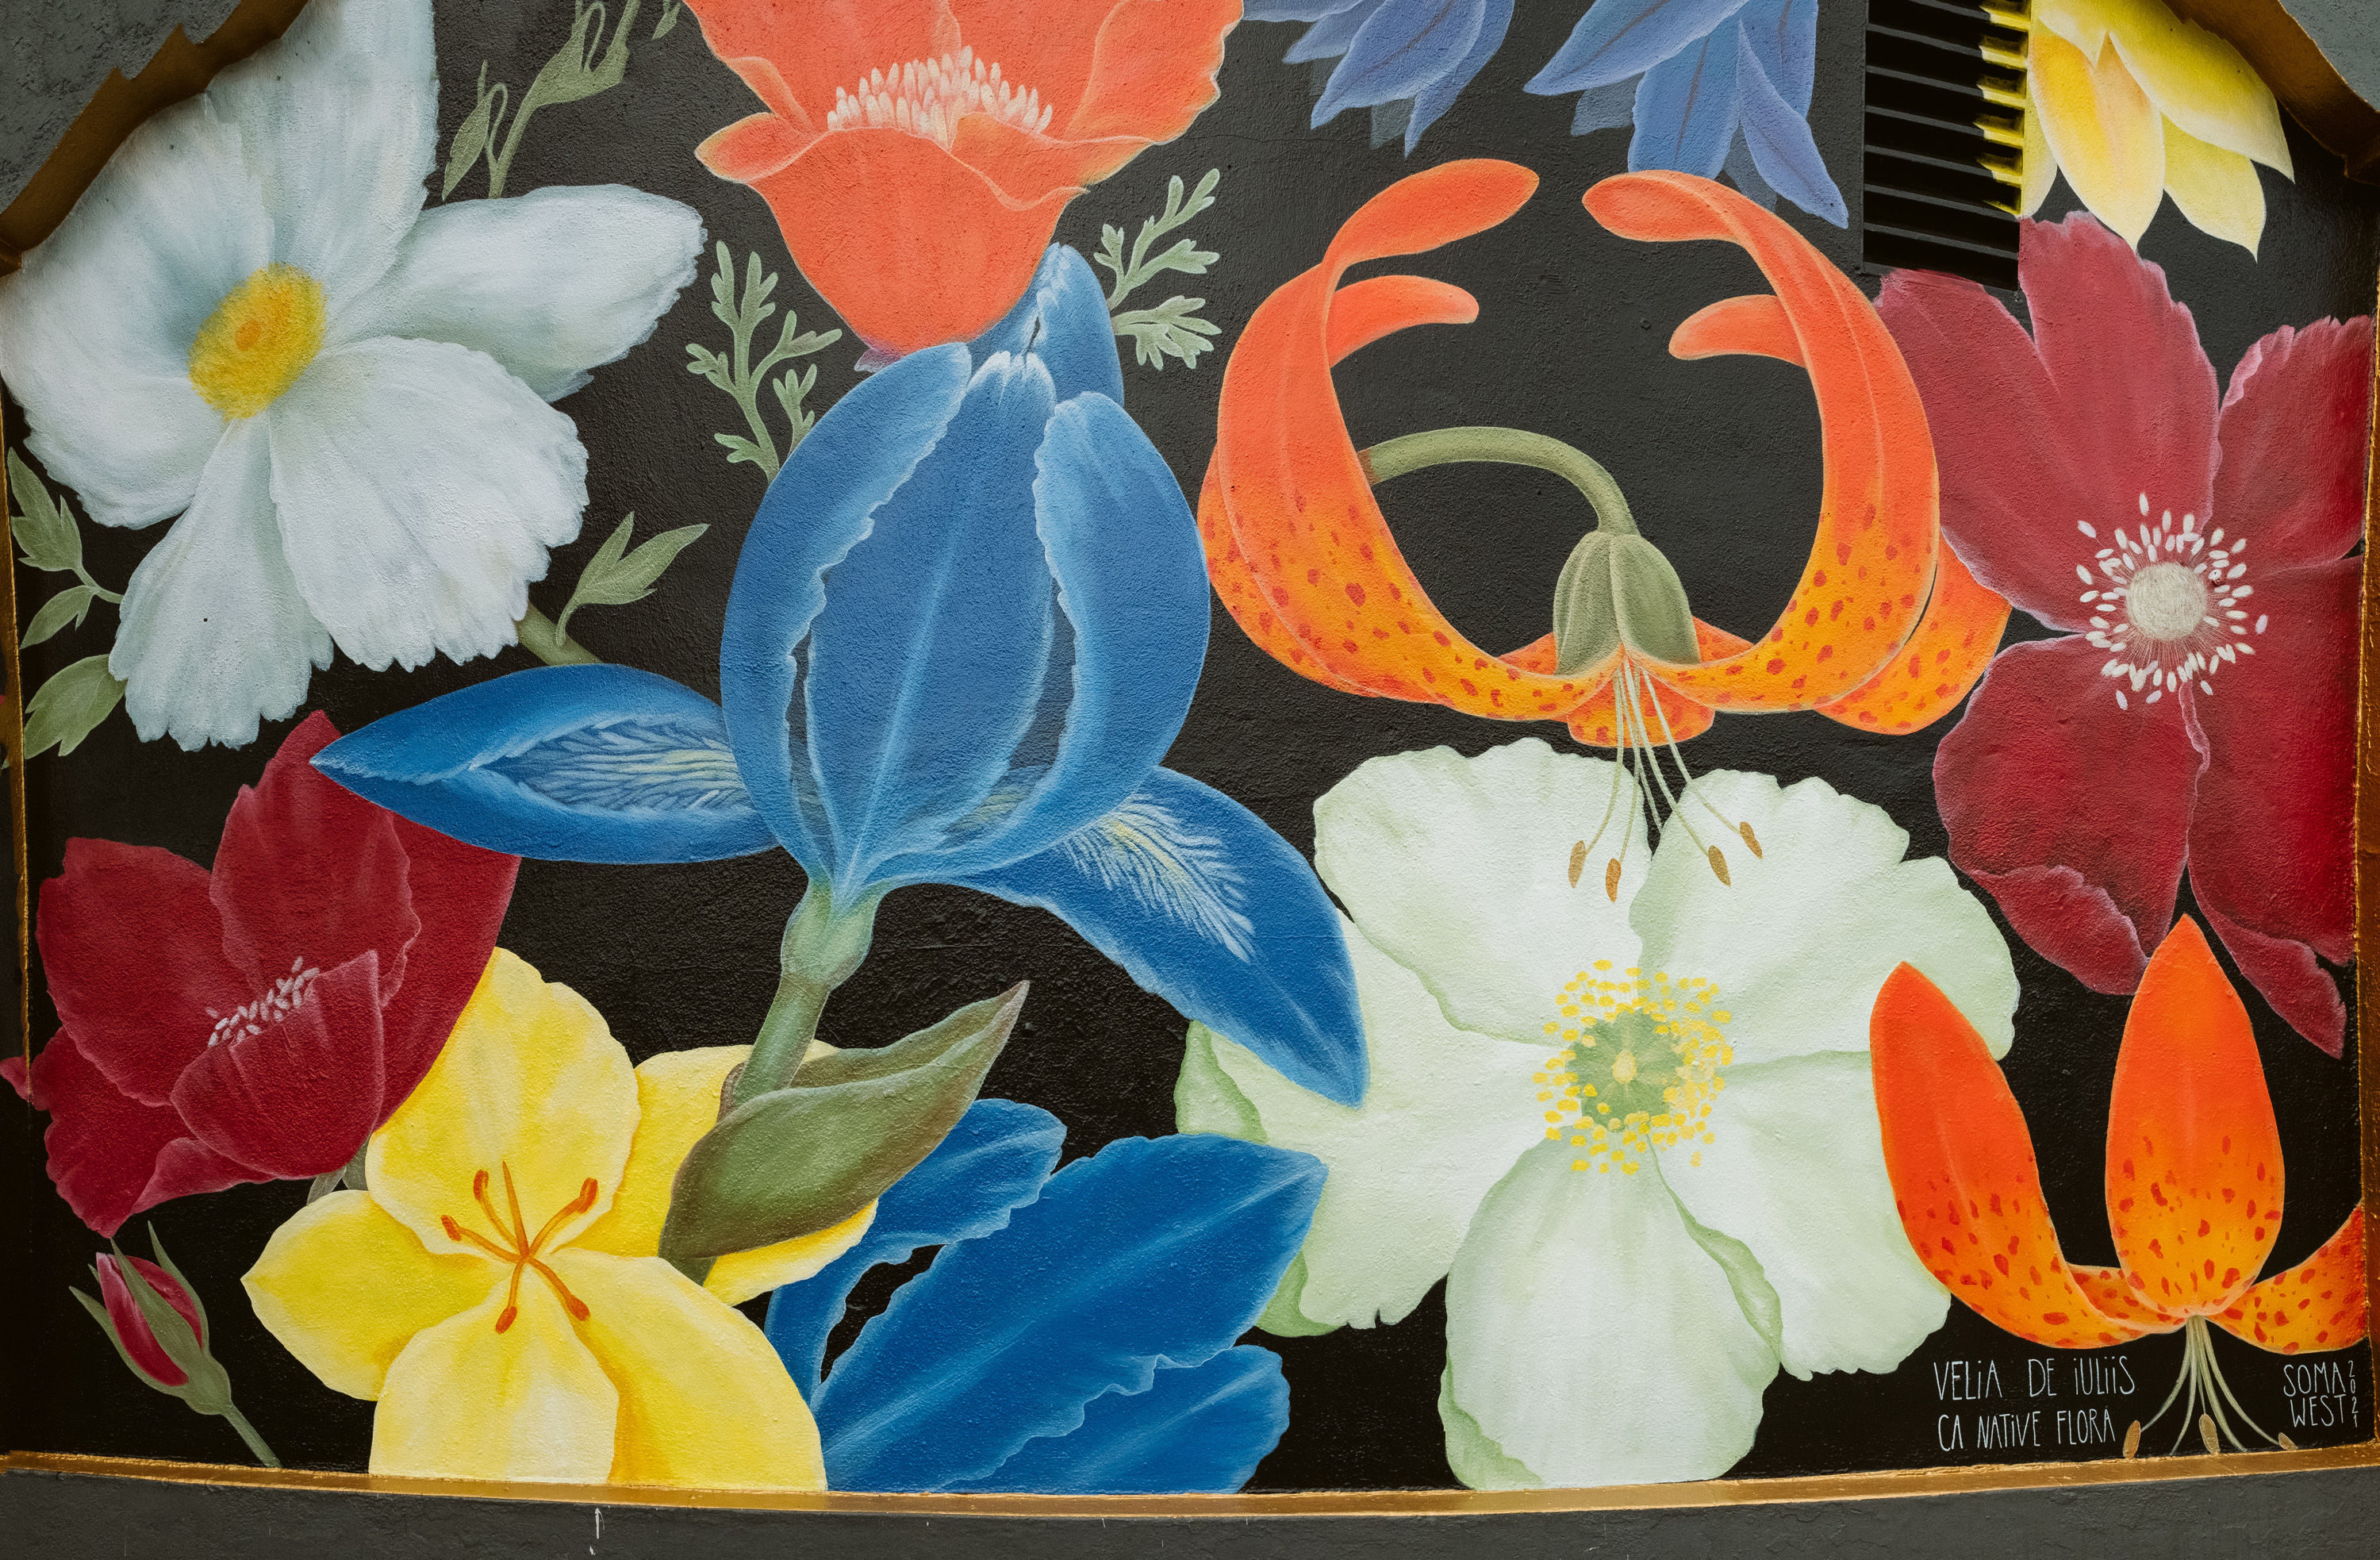 Mural depicting California Native Flowers against a black background